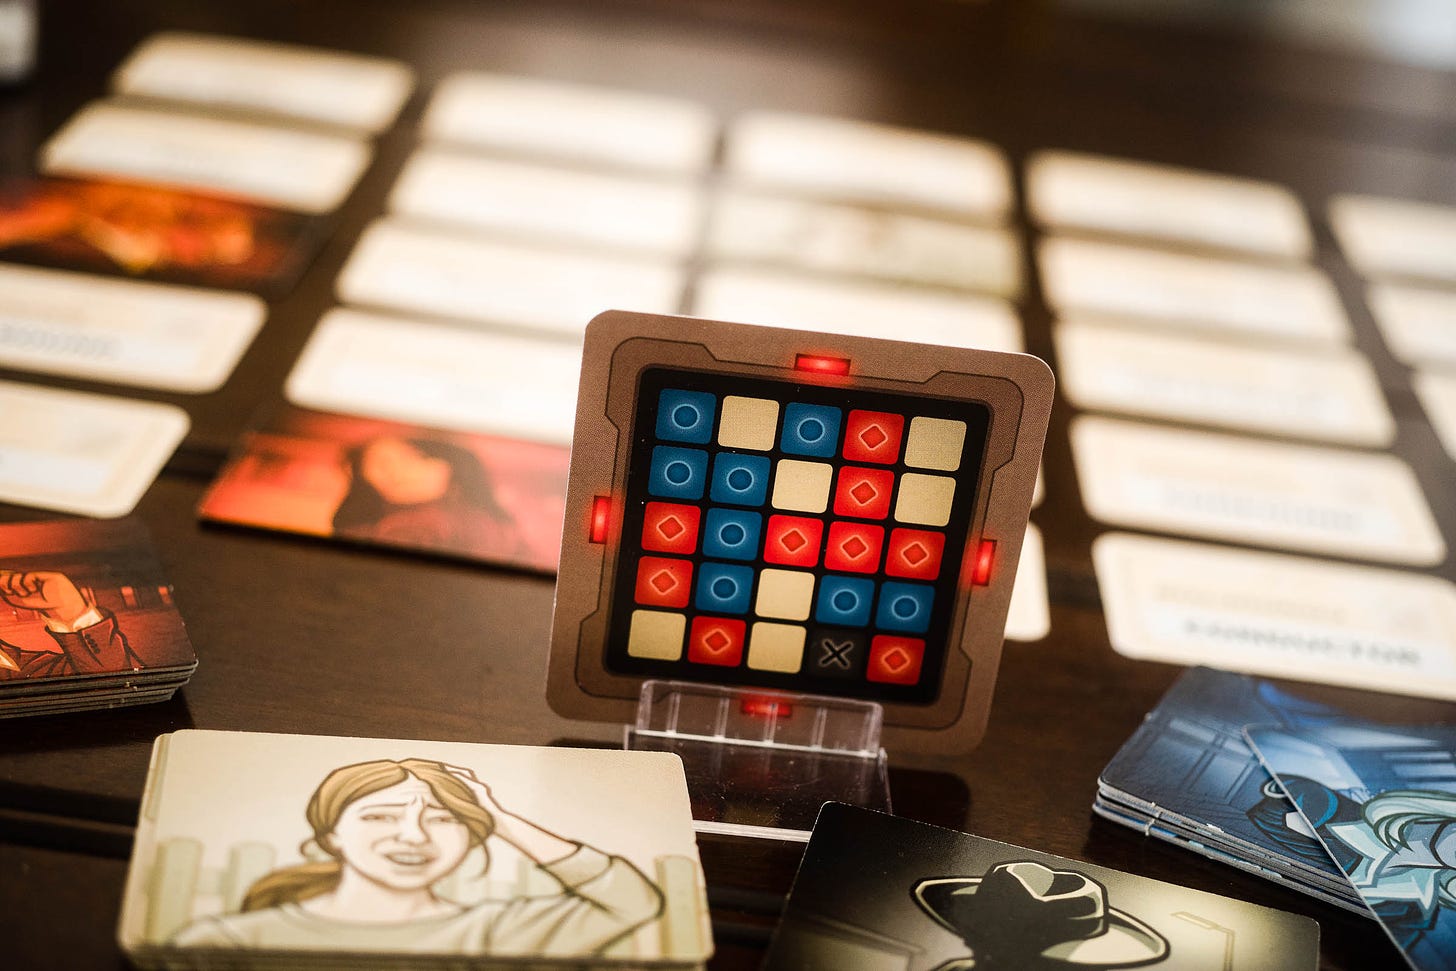 The game Codenames set up on a table.